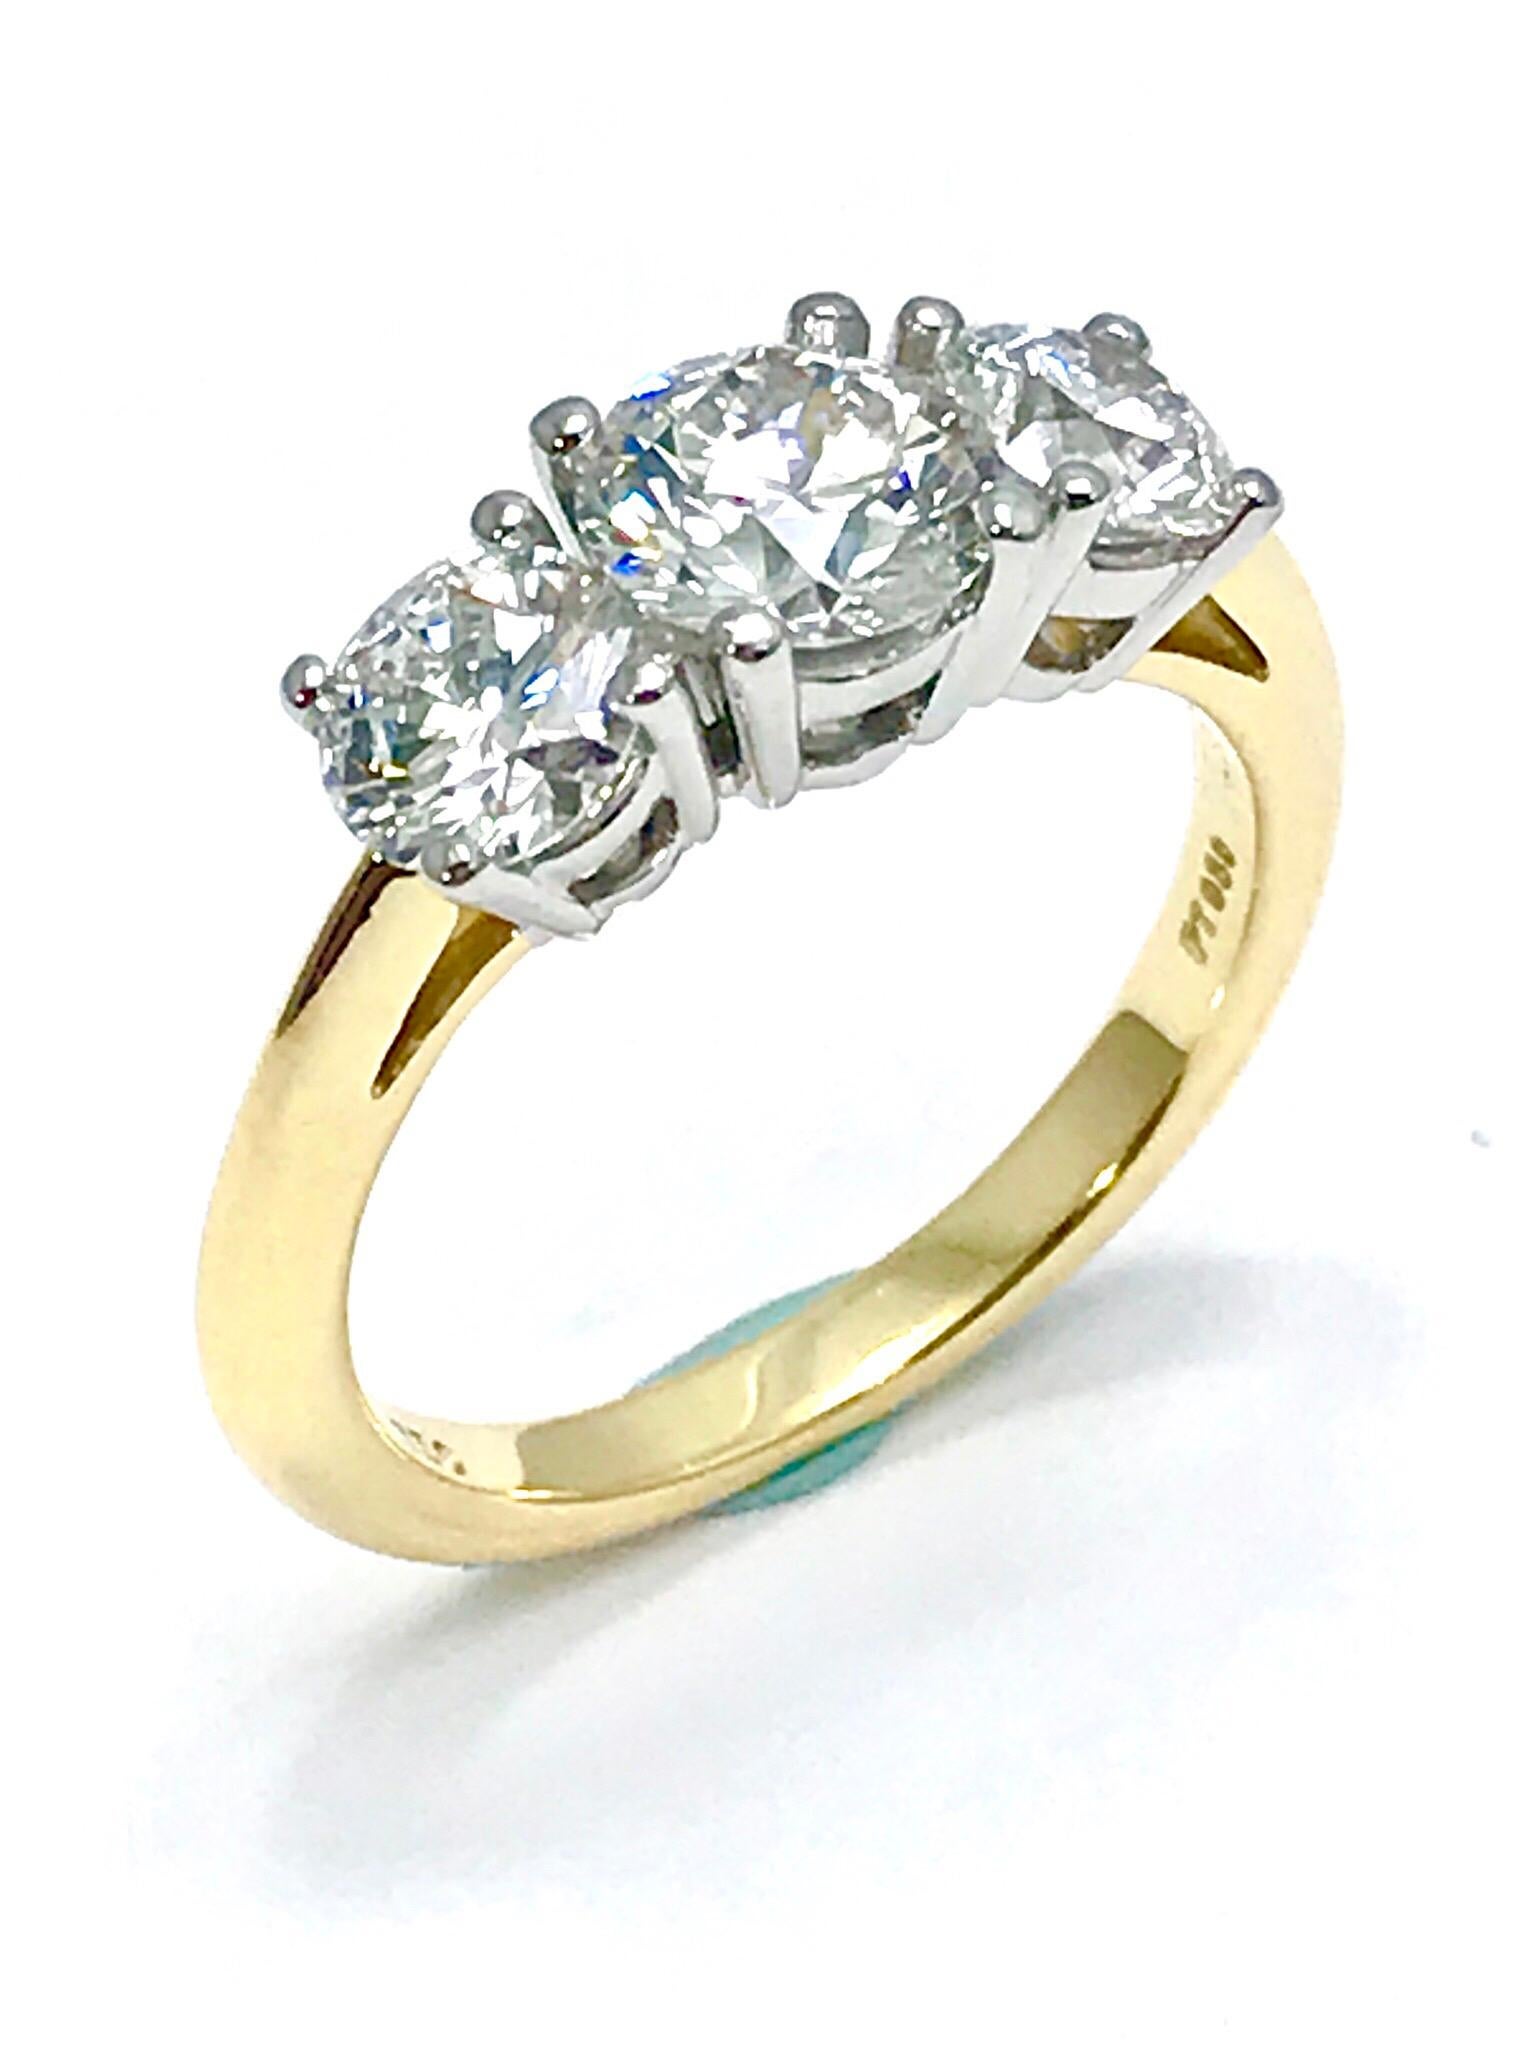 A beautiful classic Tiffany & Co. 1.82 carat total weight three Diamond platinum and 18 karat yellow gold ring.  The three round brilliant Diamonds are set in four prong basket settings, made in platinum, with an 18 karat yellow shank.  All three